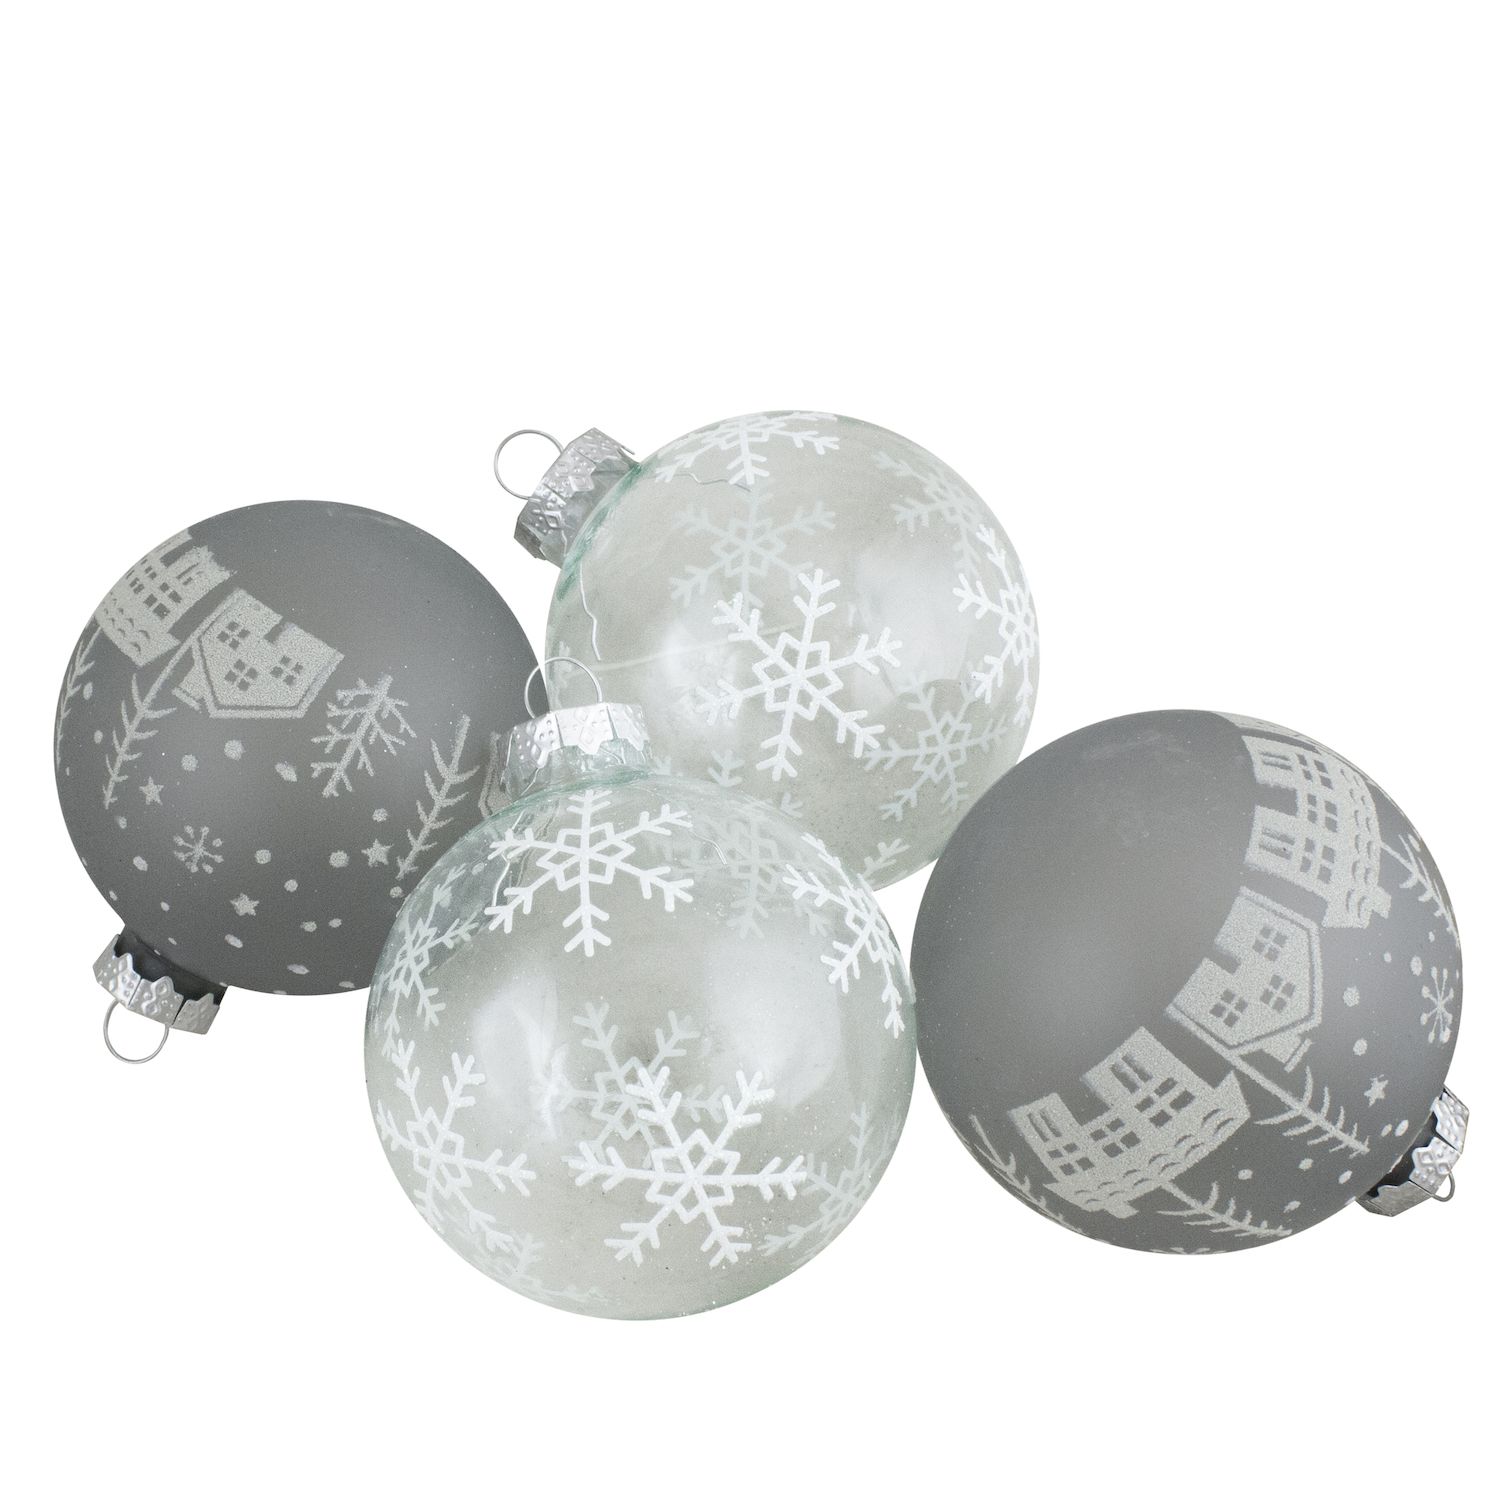 Northlight 3.25 Clear Iridescent with White Frost Glass Ball Christmas  Ornament